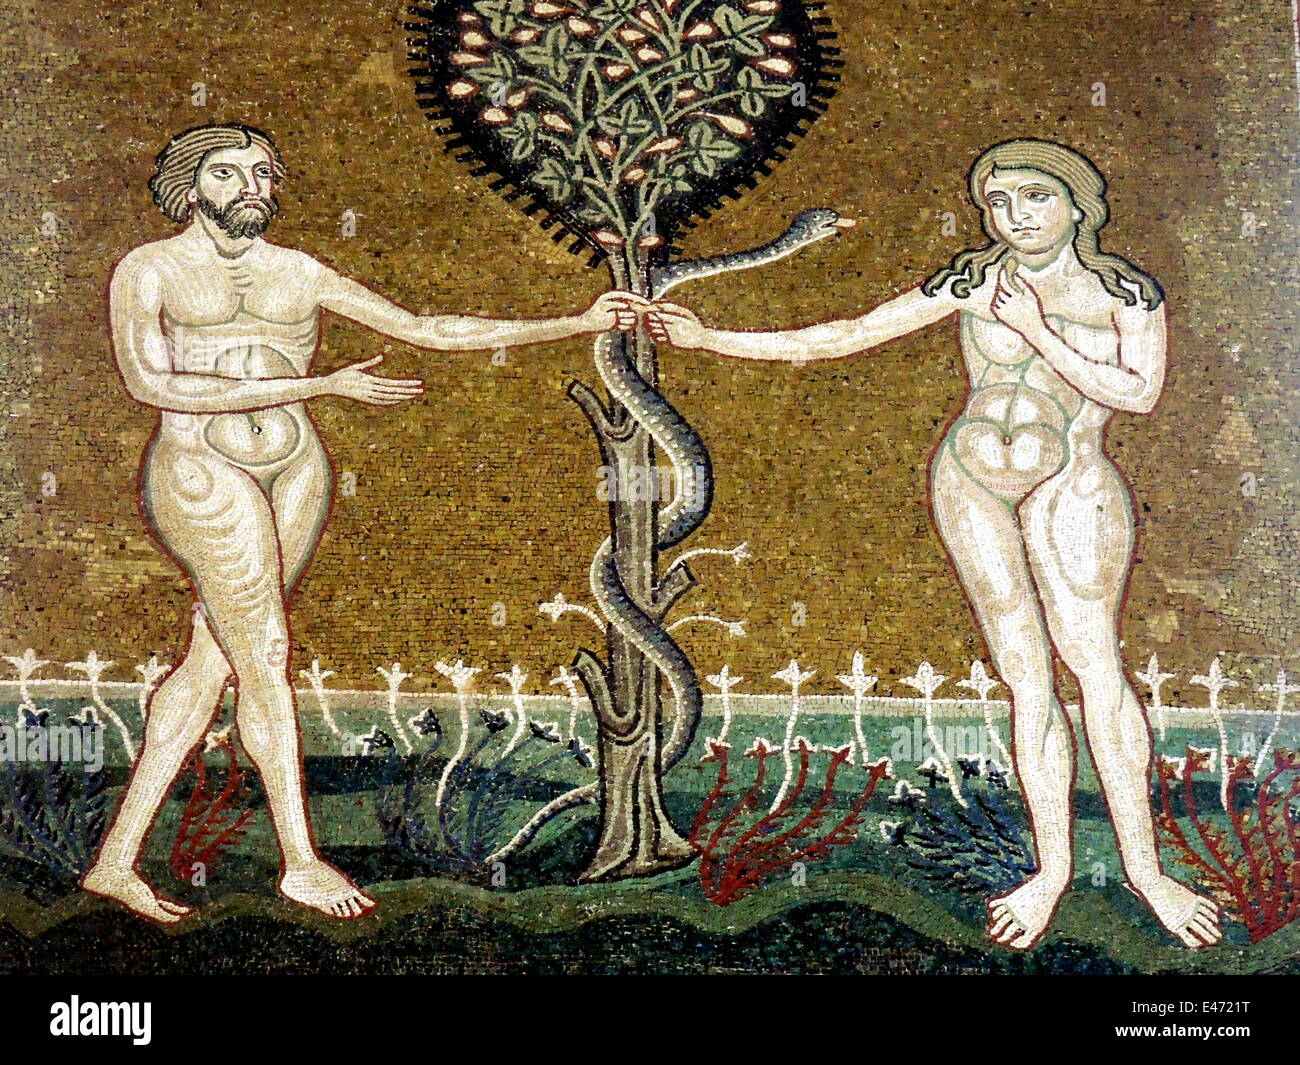 Mosaic figure of Adam and Eve in front of the tree of the knowledge in the norman Chathedral of Monreale (Sicily). Picture taken on May 25, 2014. Stock Photo